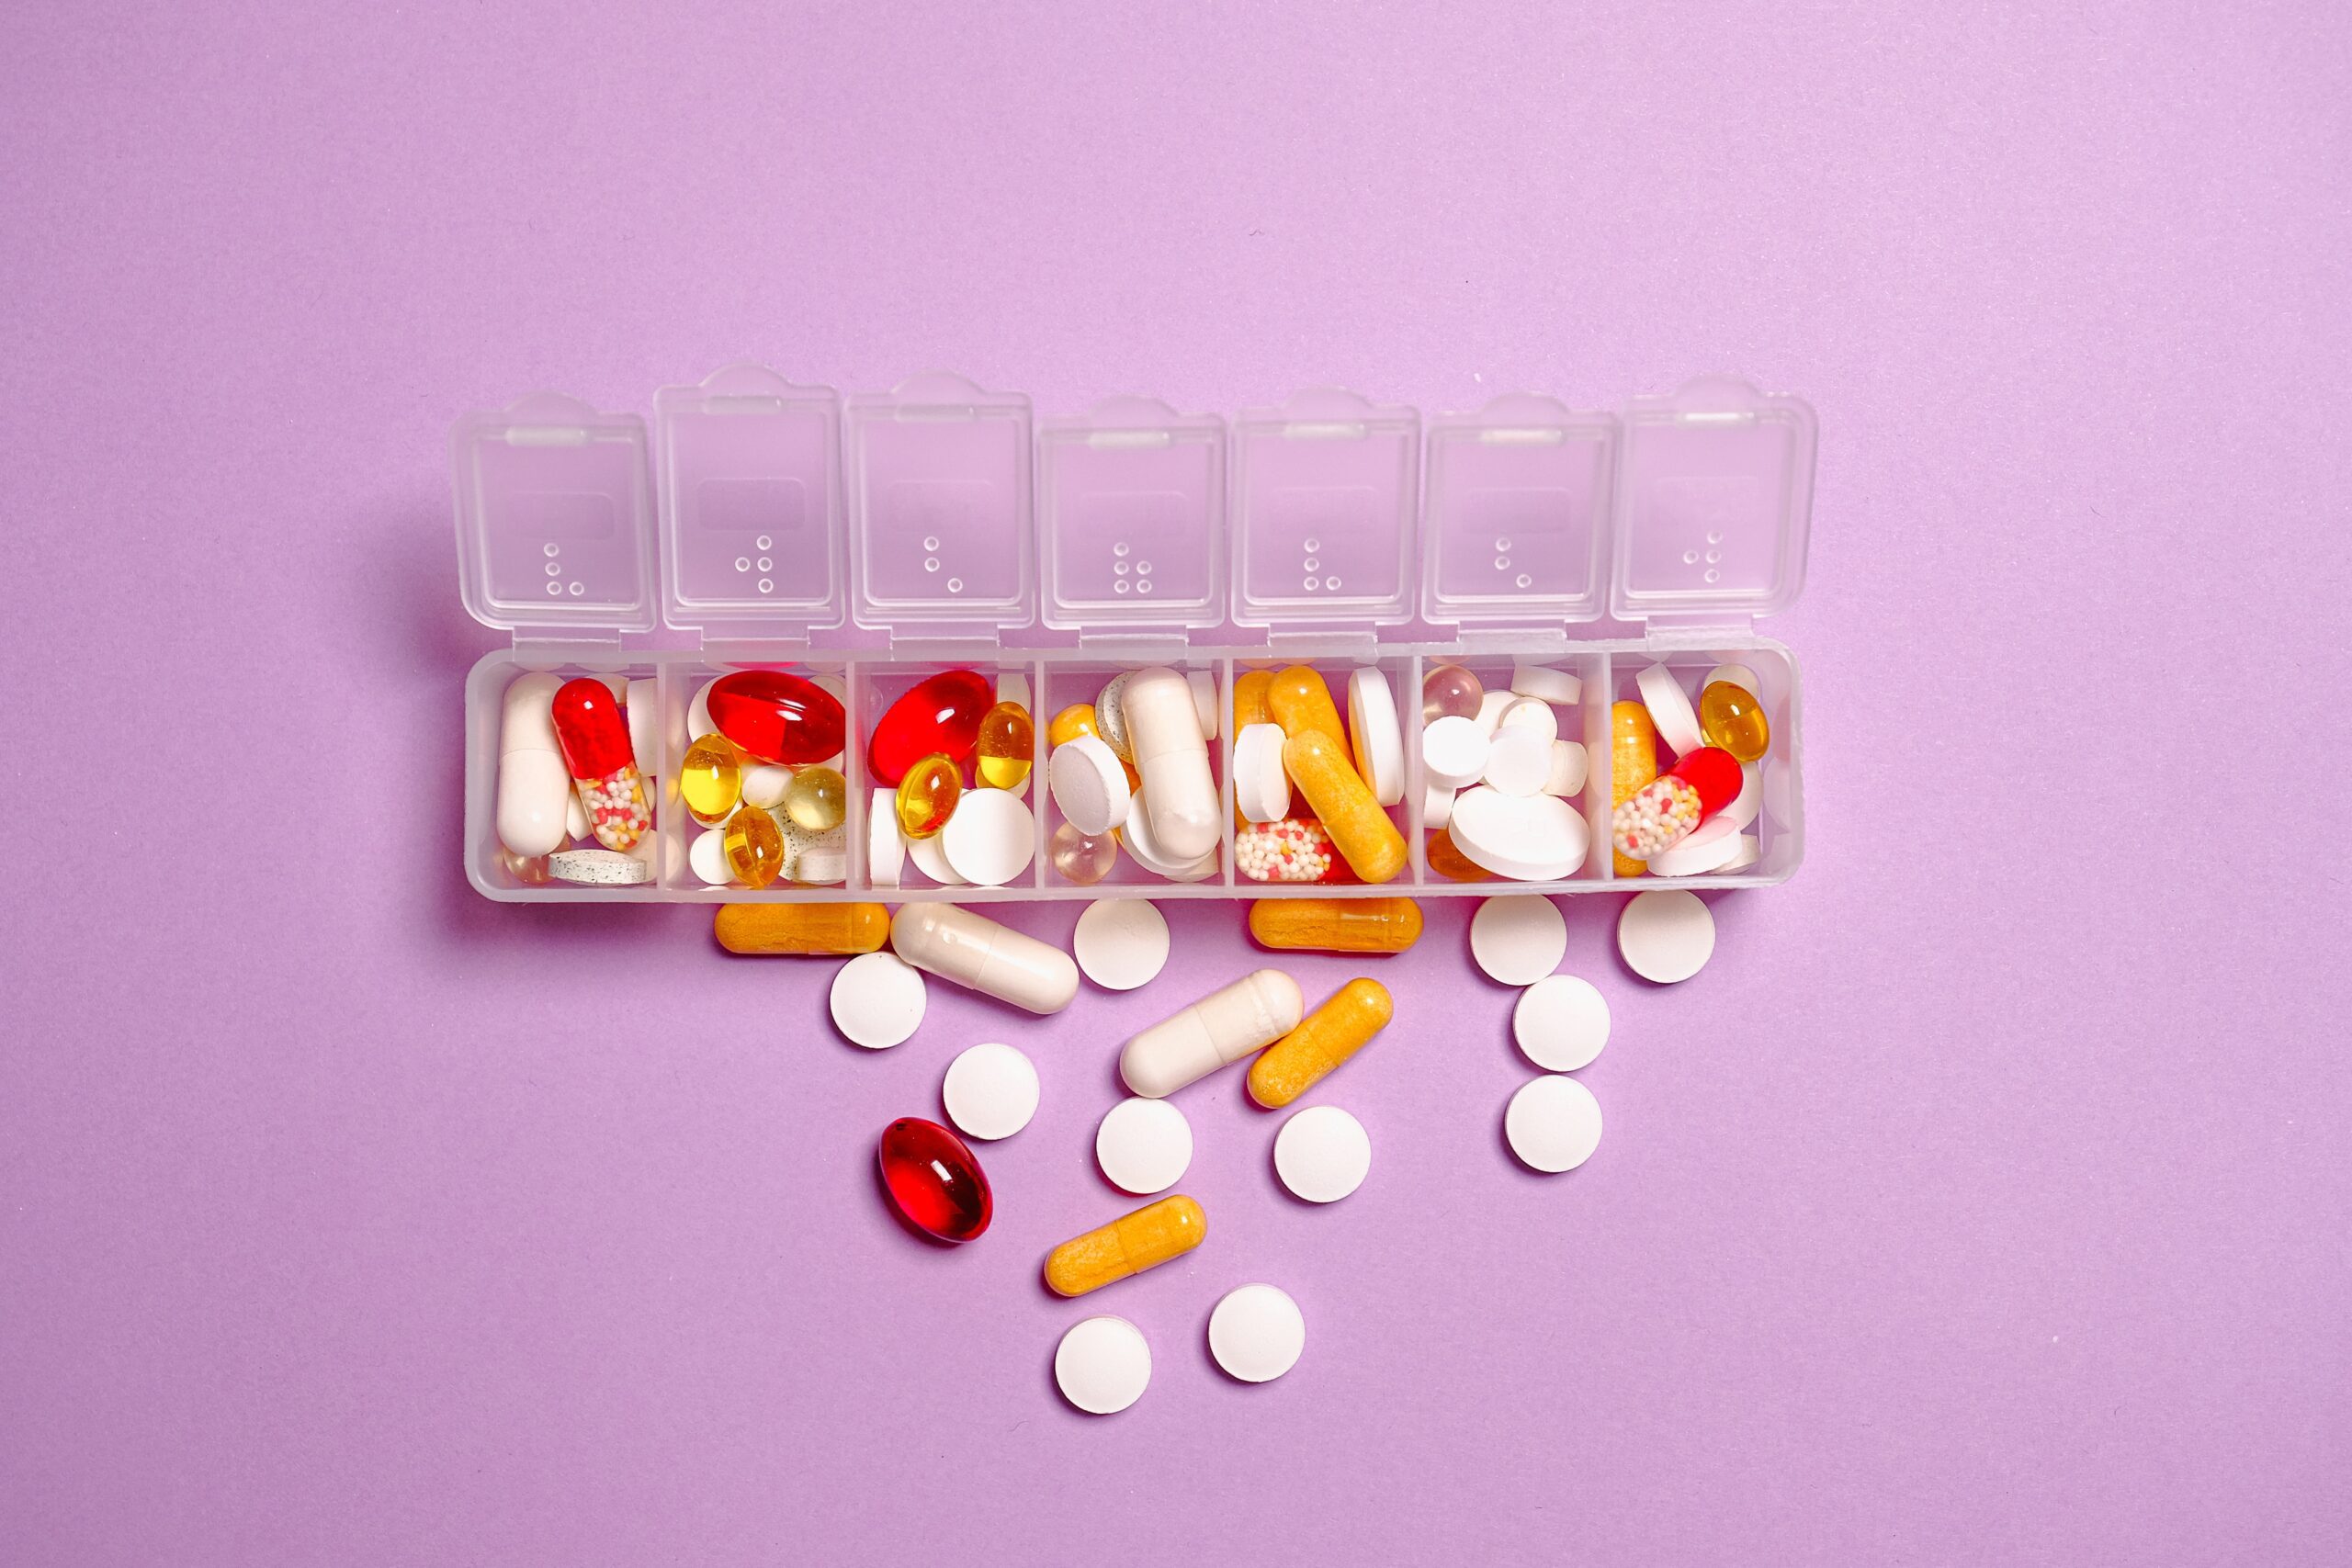 Photo by Anna Shvets: https://www.pexels.com/photo/clear-plastic-container-and-medicine-capsule-3683051/